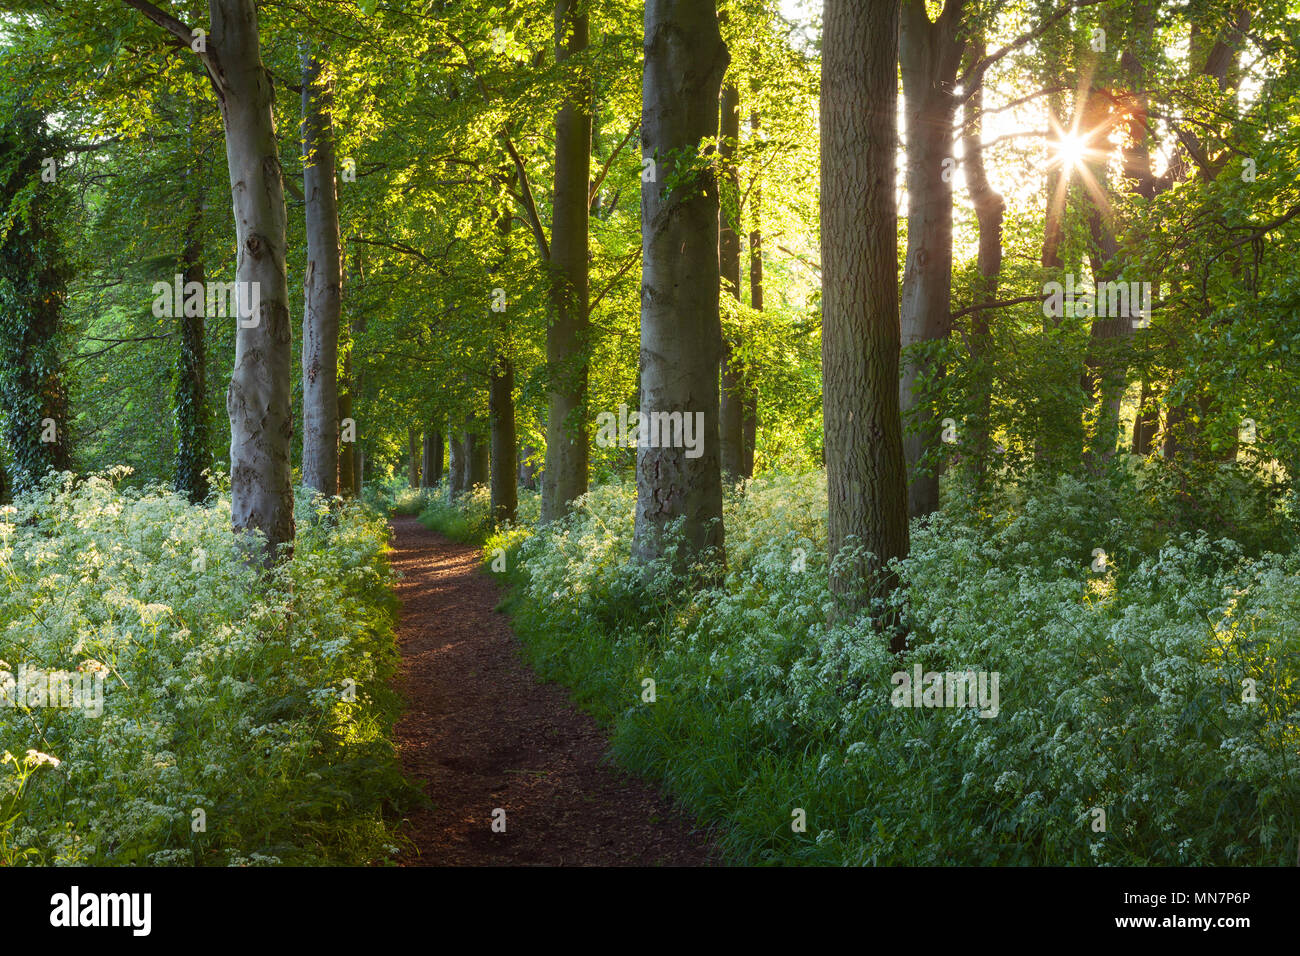 Barton-upon-Humber, North Lincolnshire, UK. 14th May, 2018. UK Weather: Late evening light on Cow Parsley and Beech Trees in Baysgarth Park in Spring. Barton-upon-Humber, North Lincolnshire, UK. 14th May 2018. Credit: LEE BEEL/Alamy Live News Stock Photo